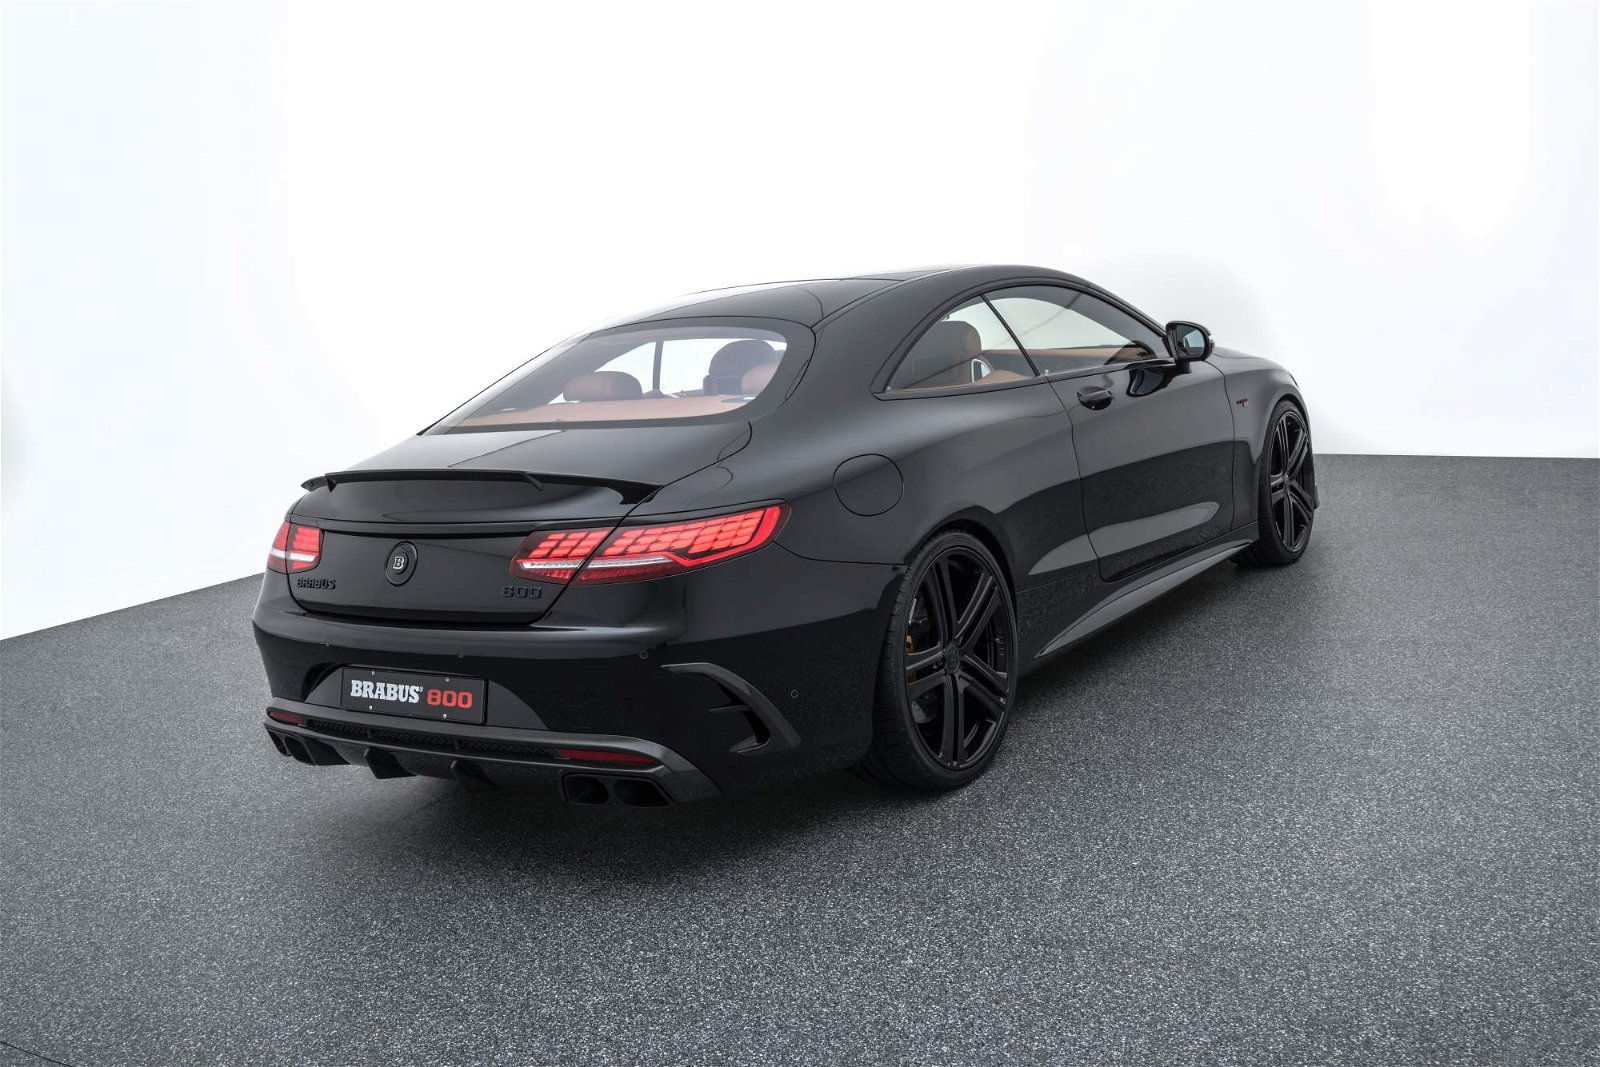 Brabus-800-based-on-Mercedes-AMG-S63-4MATIC+-Coupe-15